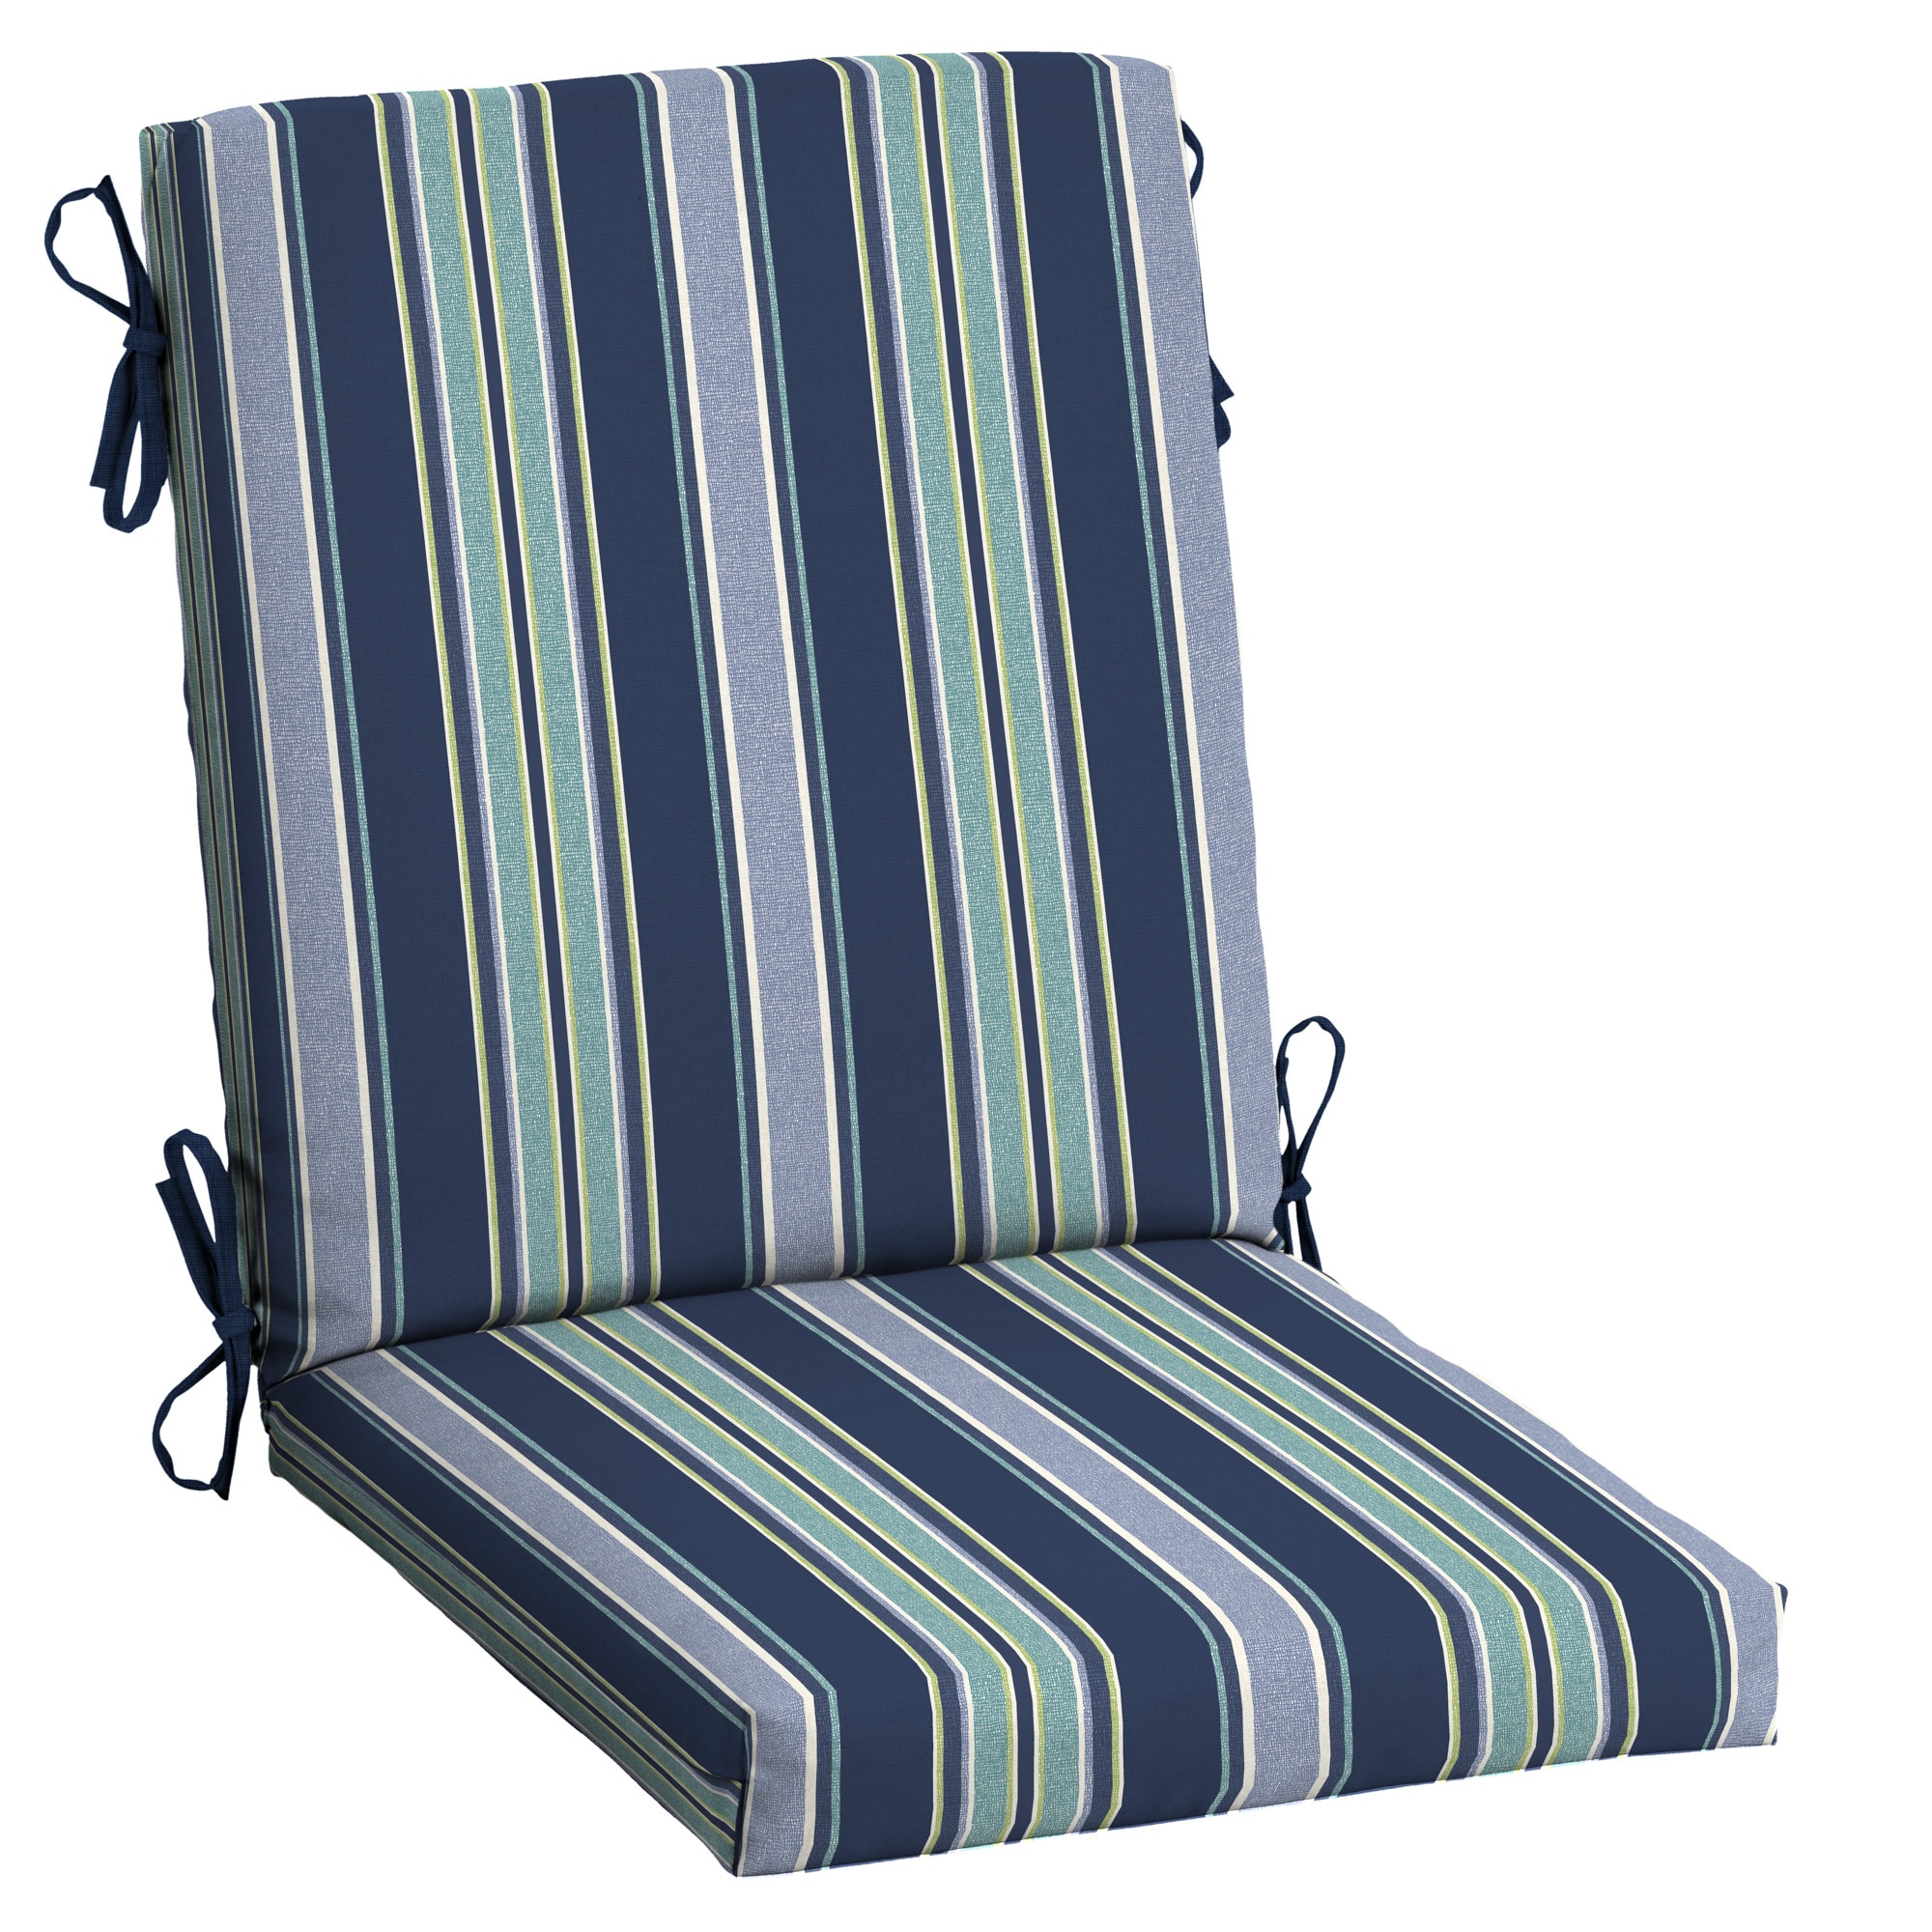 20 X 44 Sapphire Aurora Stripe Outdoor Dining Chair Cushion Polyester Fabric New 